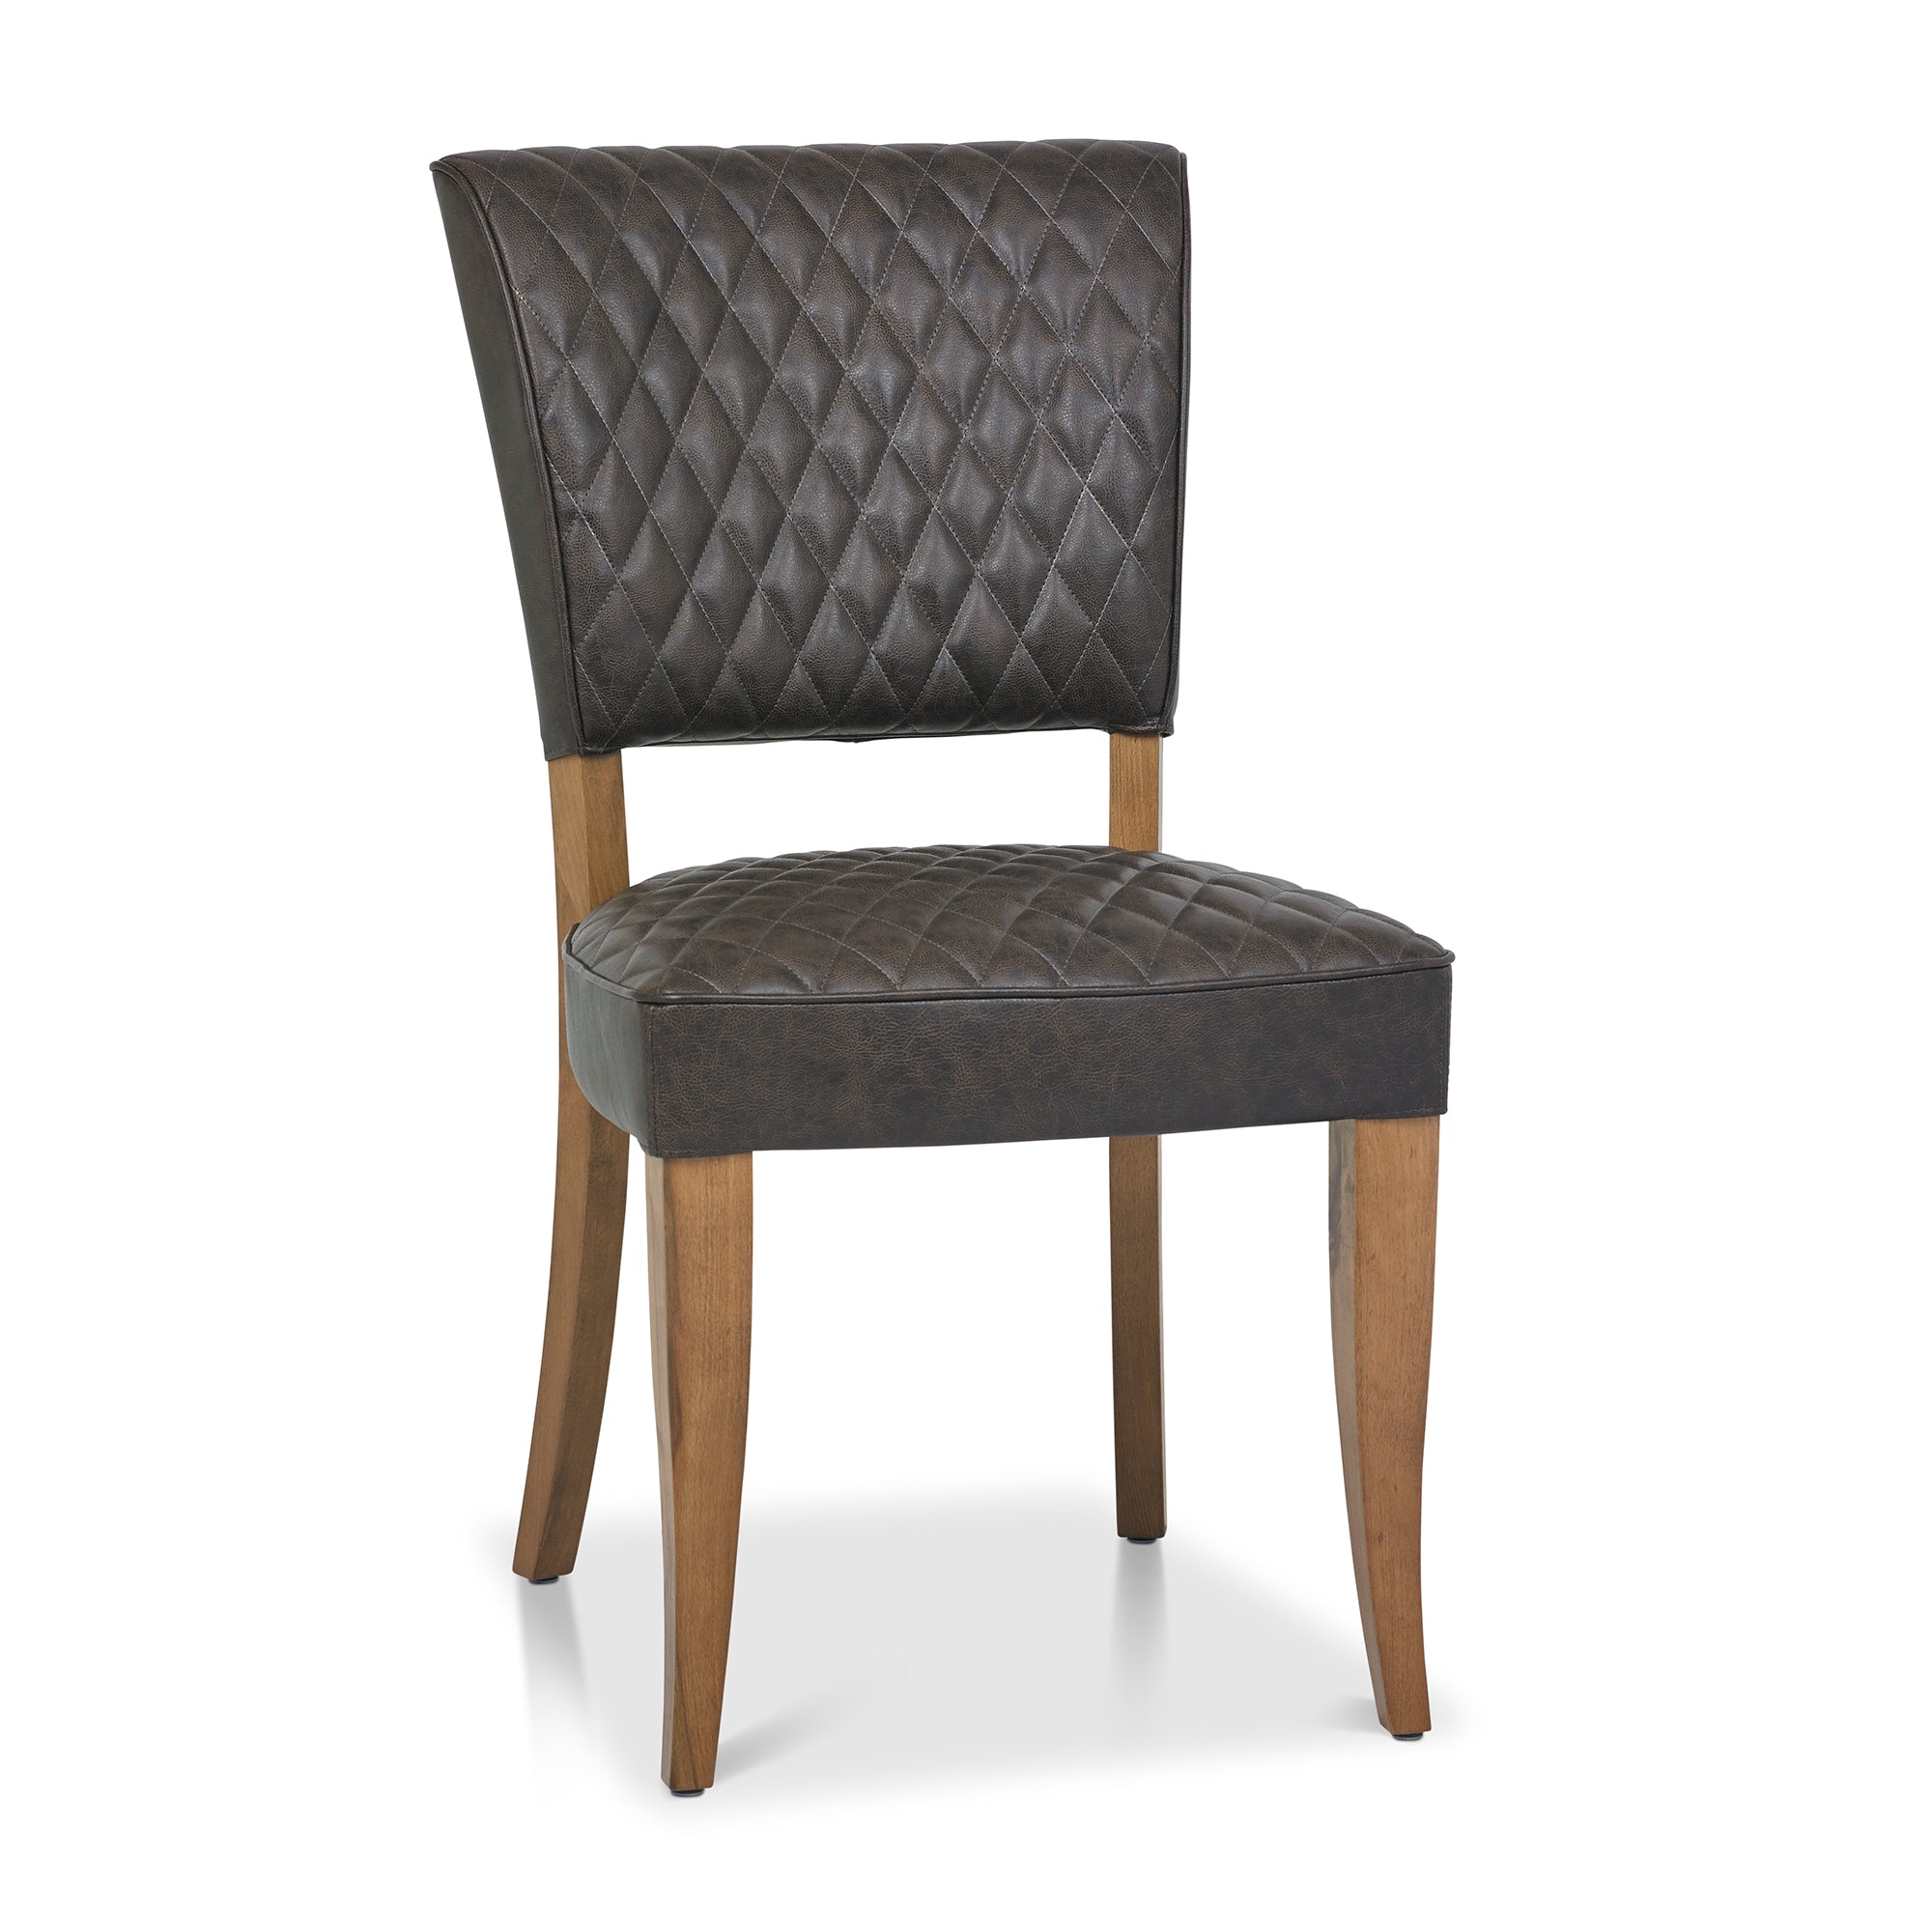 Landon Rustic Oak Dining Chairs (Pair) Saddle Faux Leather